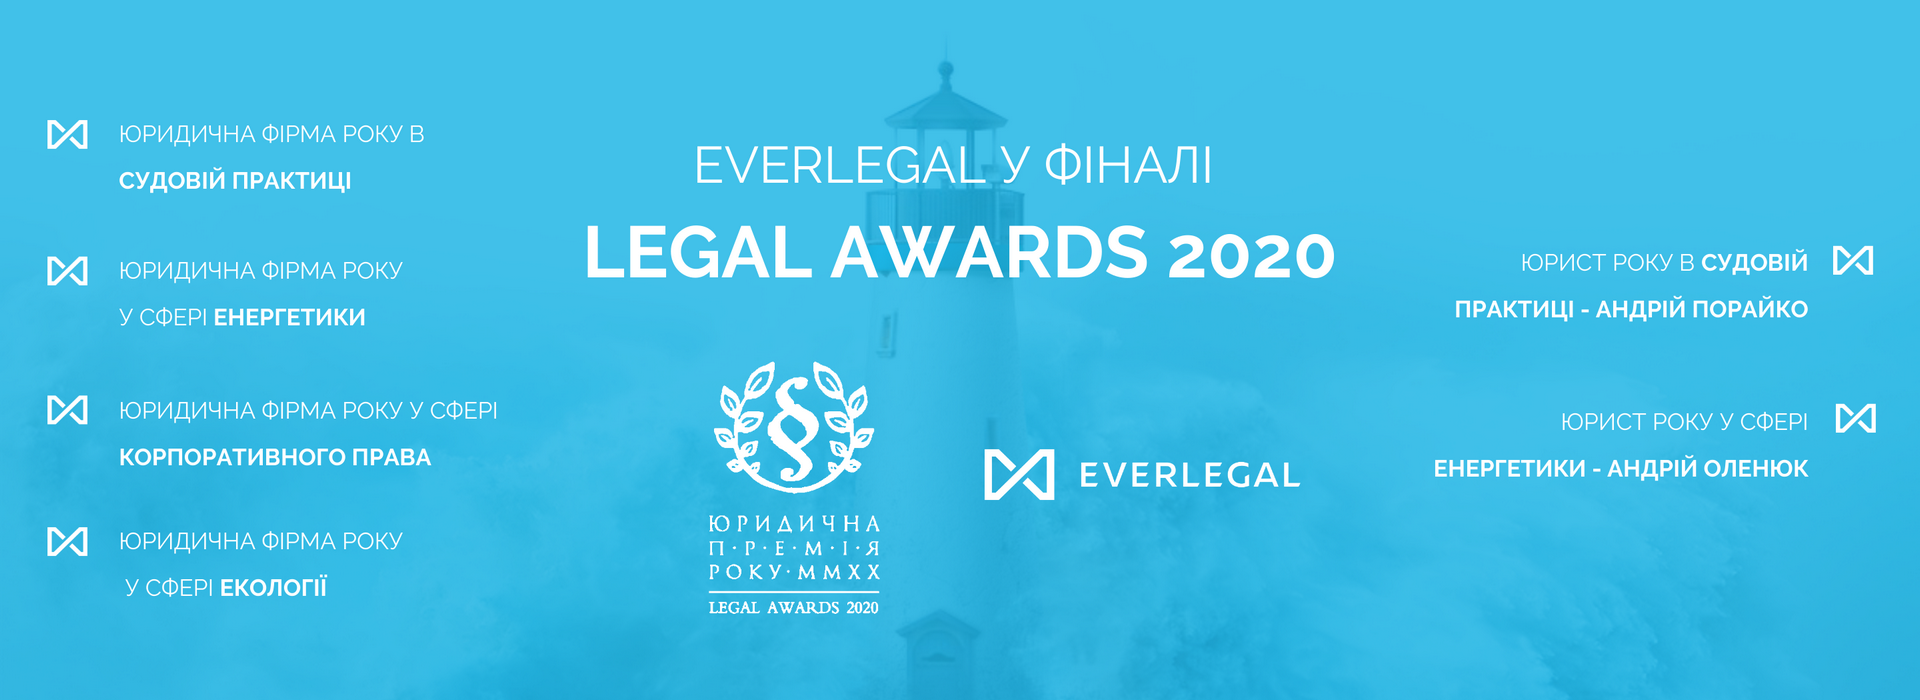 EVERLEGAL is among the finalists of “Legal awards 2020”